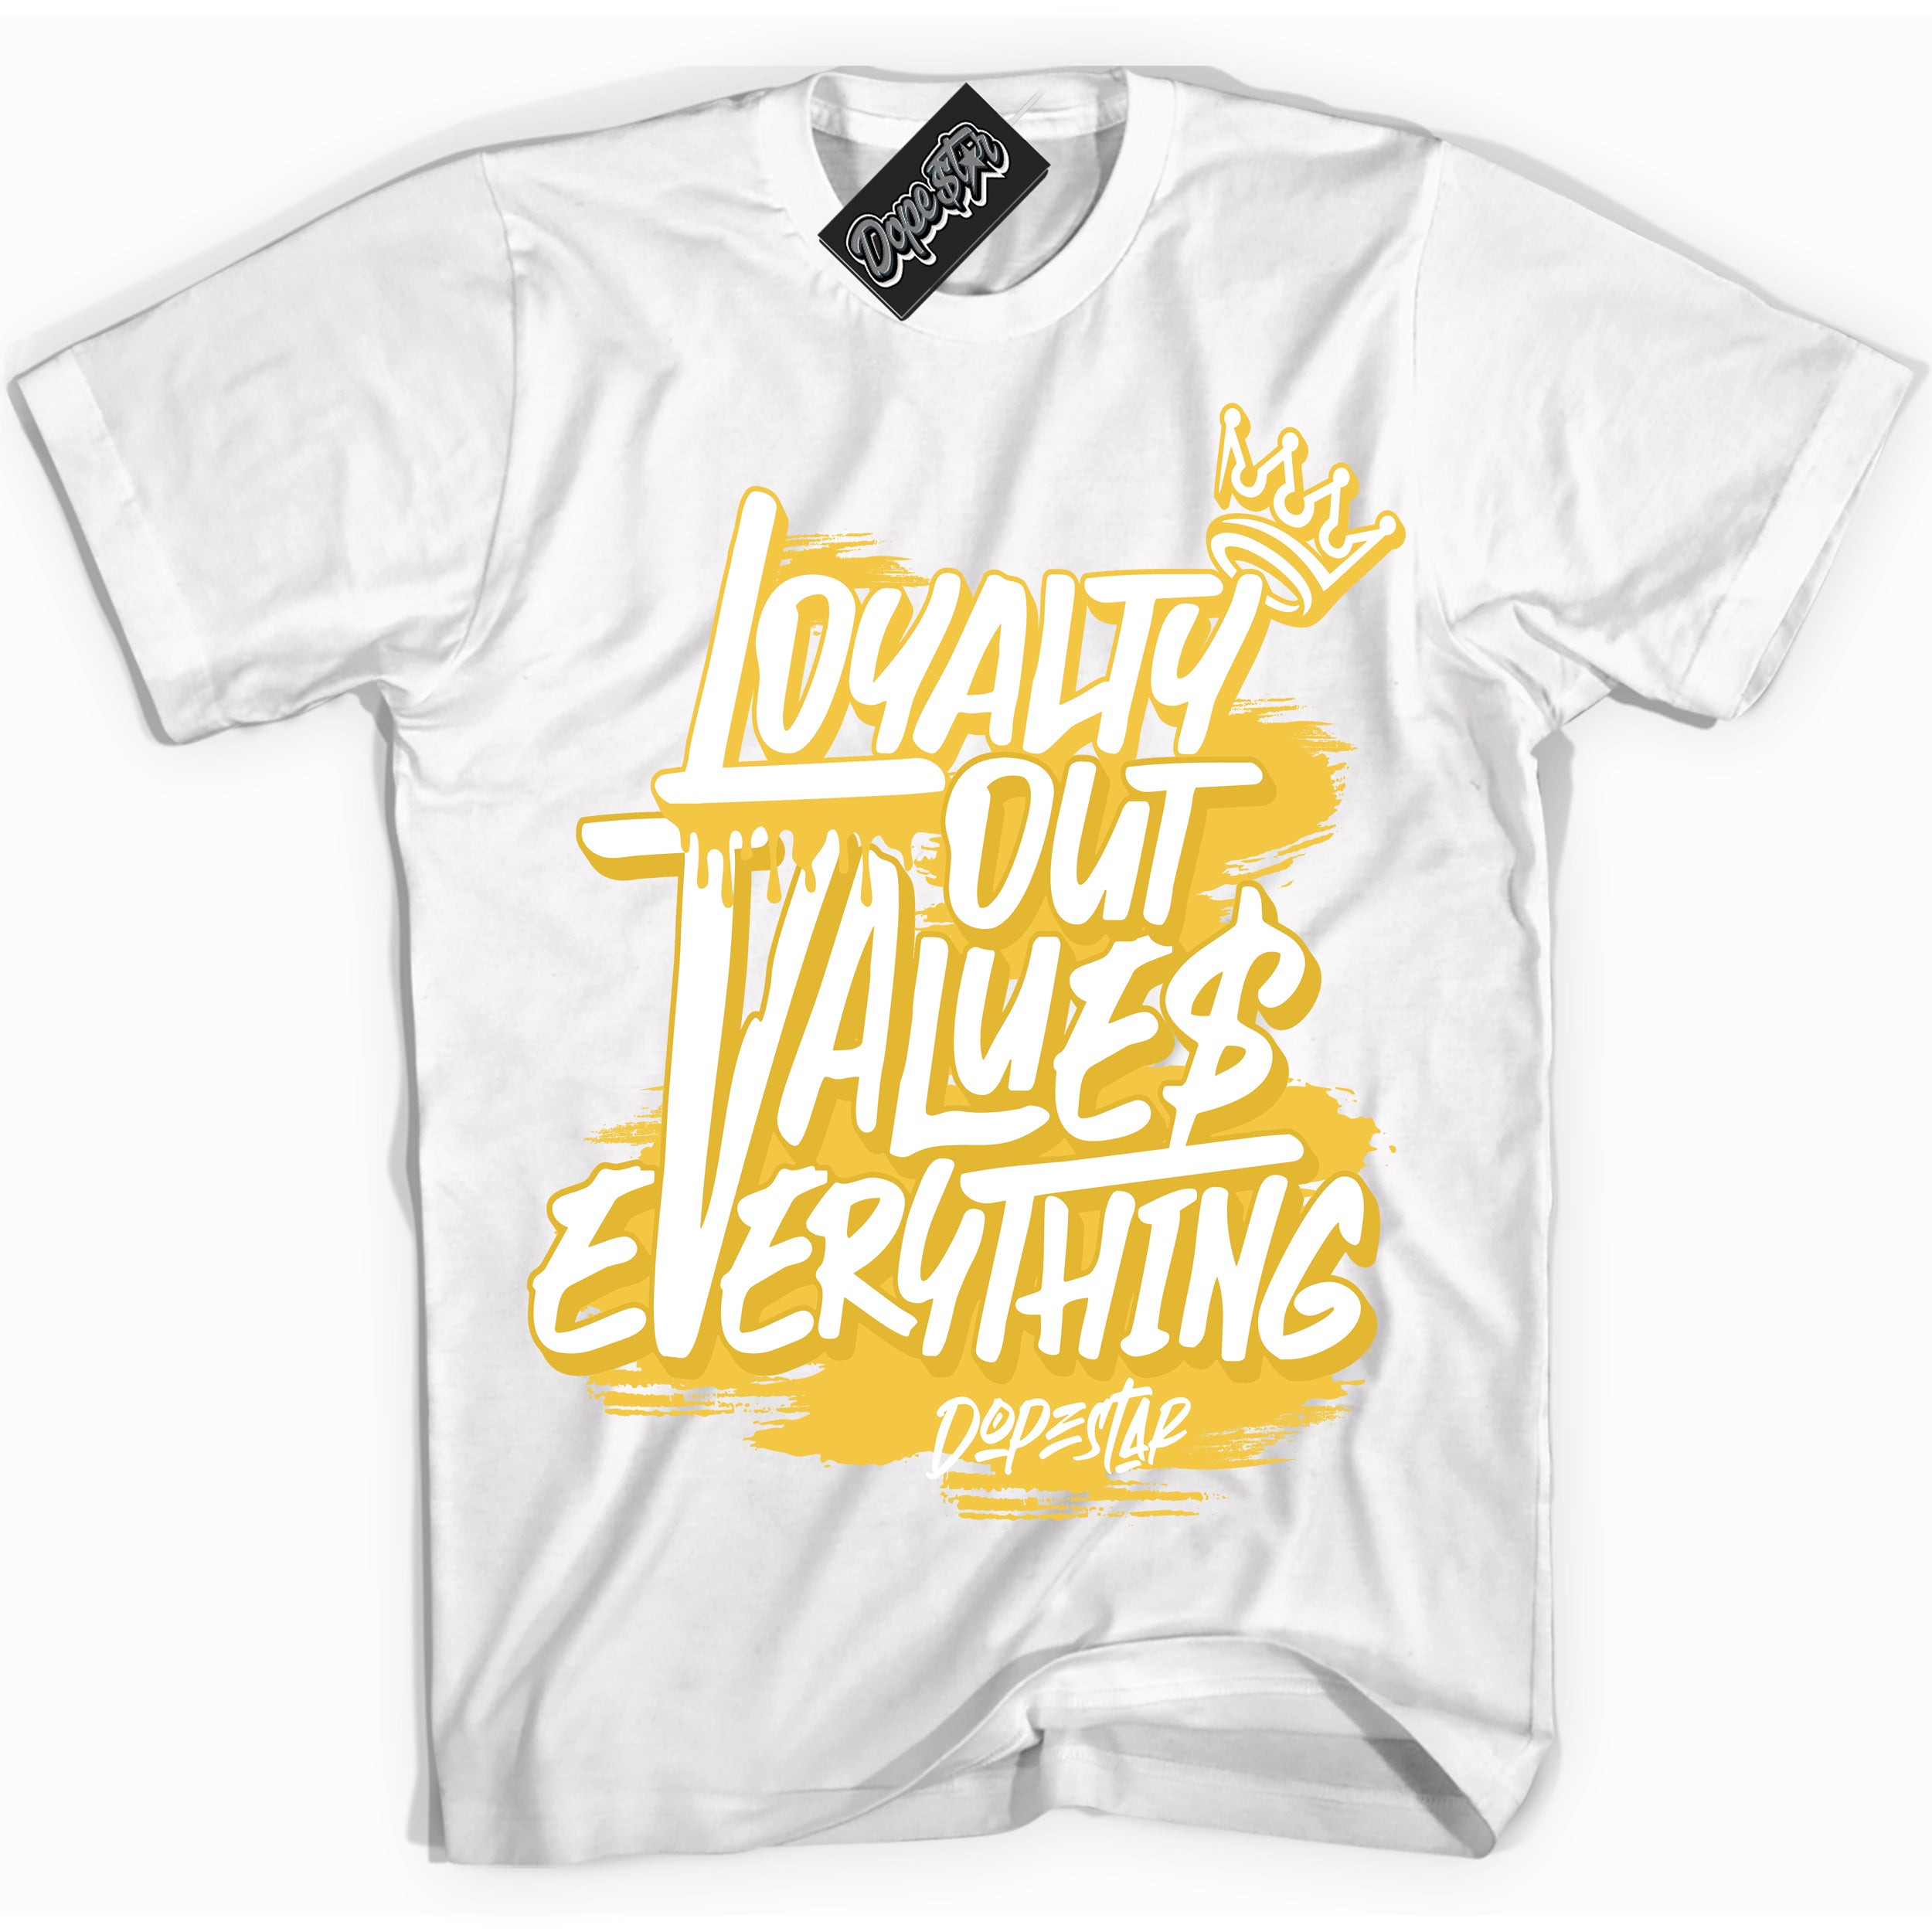 Cool White Shirt with “ Loyalty Out Values Everything” design that perfectly matches Tour Yellow Snakeskin 11s Sneakers.